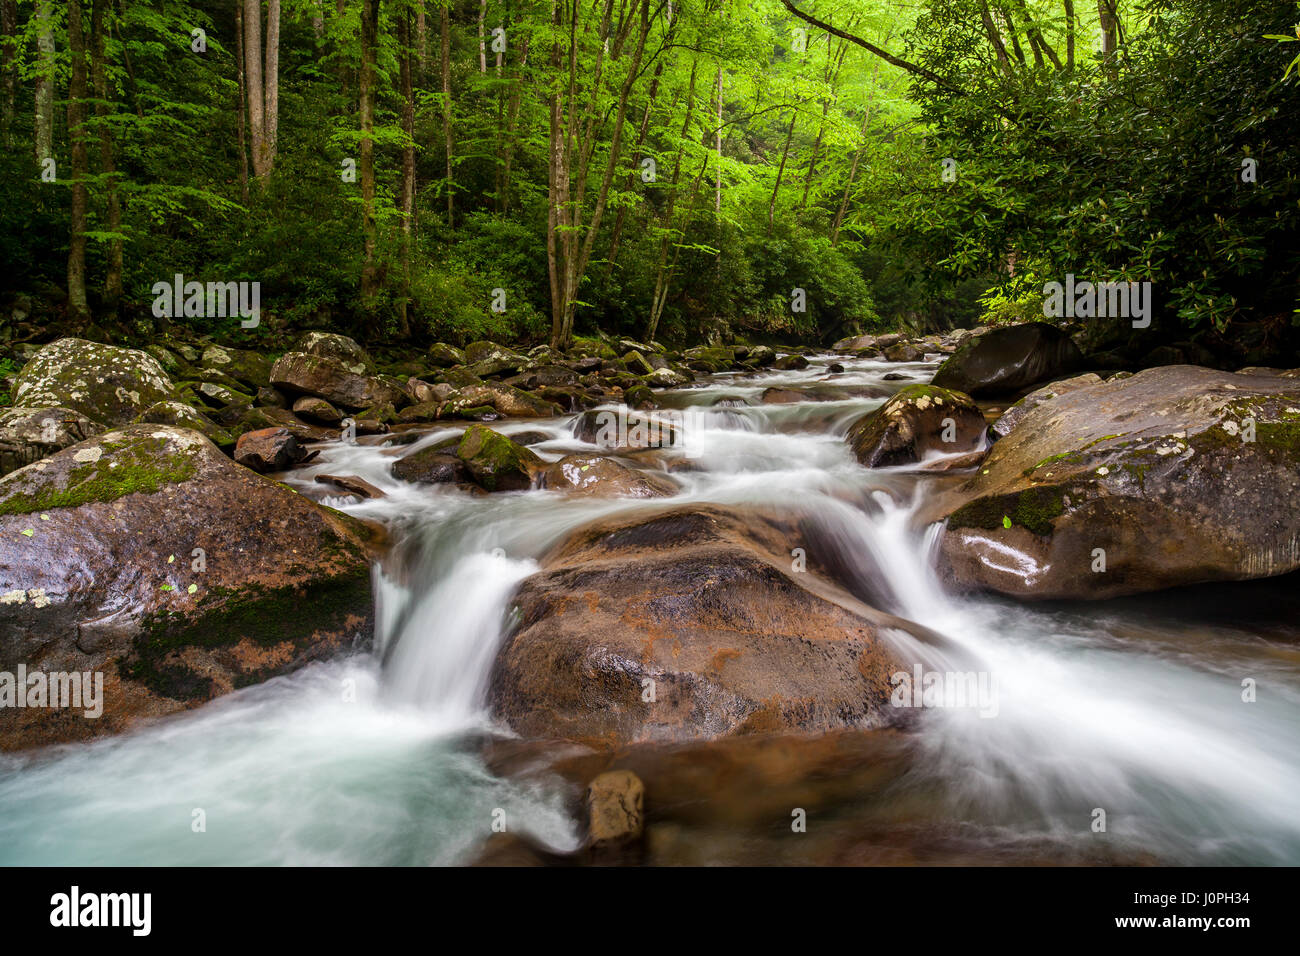 This is an image looking upstream on Big Creek near Mouse Creek Falls.  Big Creek flows generally eastward through the northwestern part of the Great Smoky Mountain National Park, with its headwaters near Inadu Knob. Stock Photo